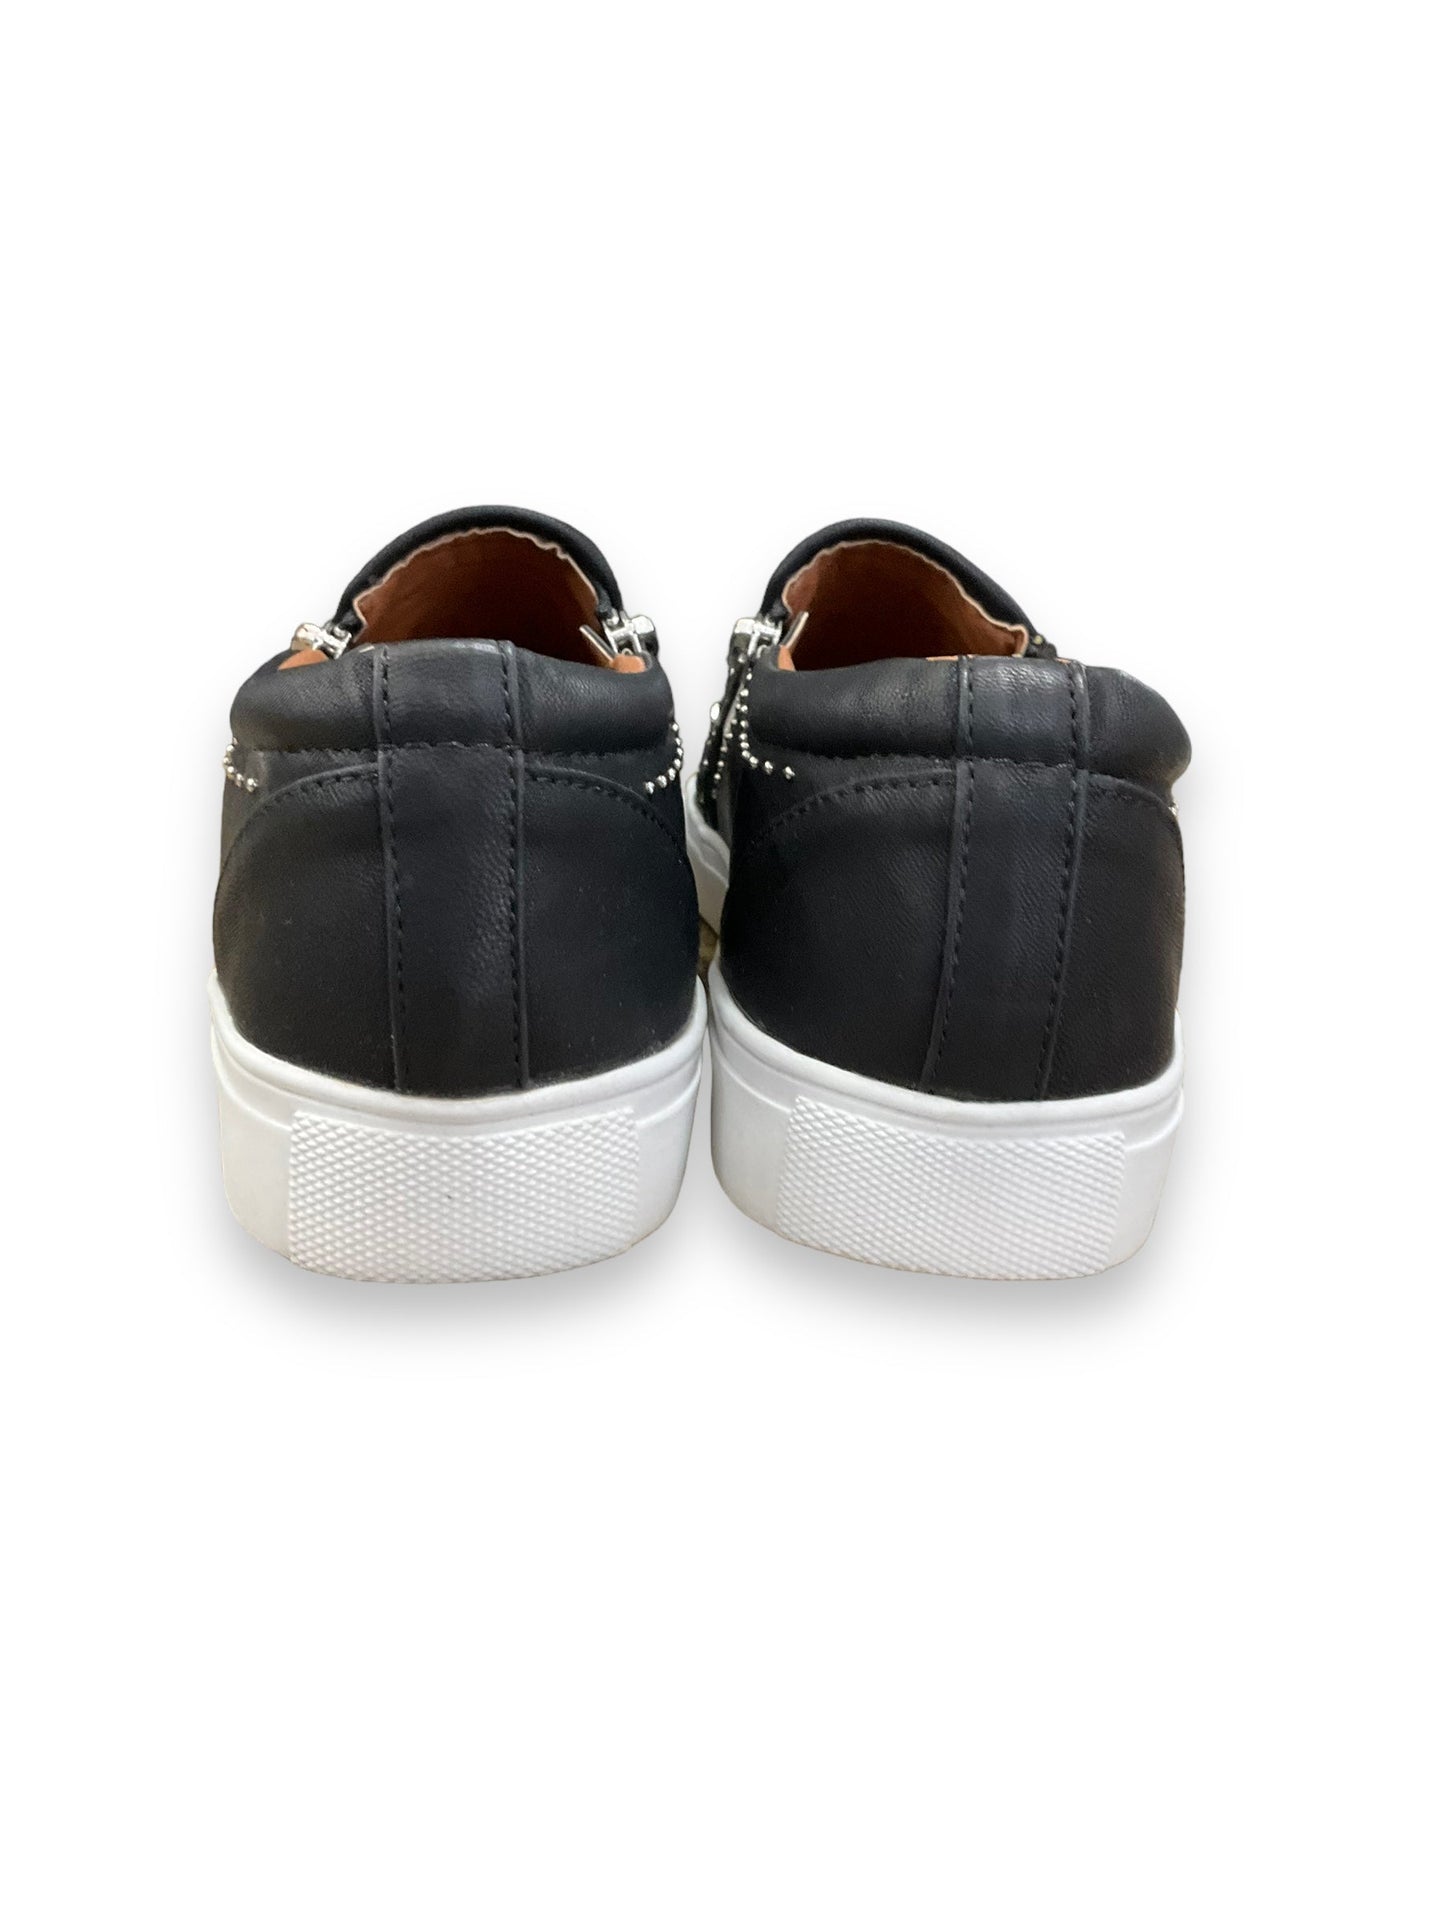 Black Shoes Sneakers Report, Size 8